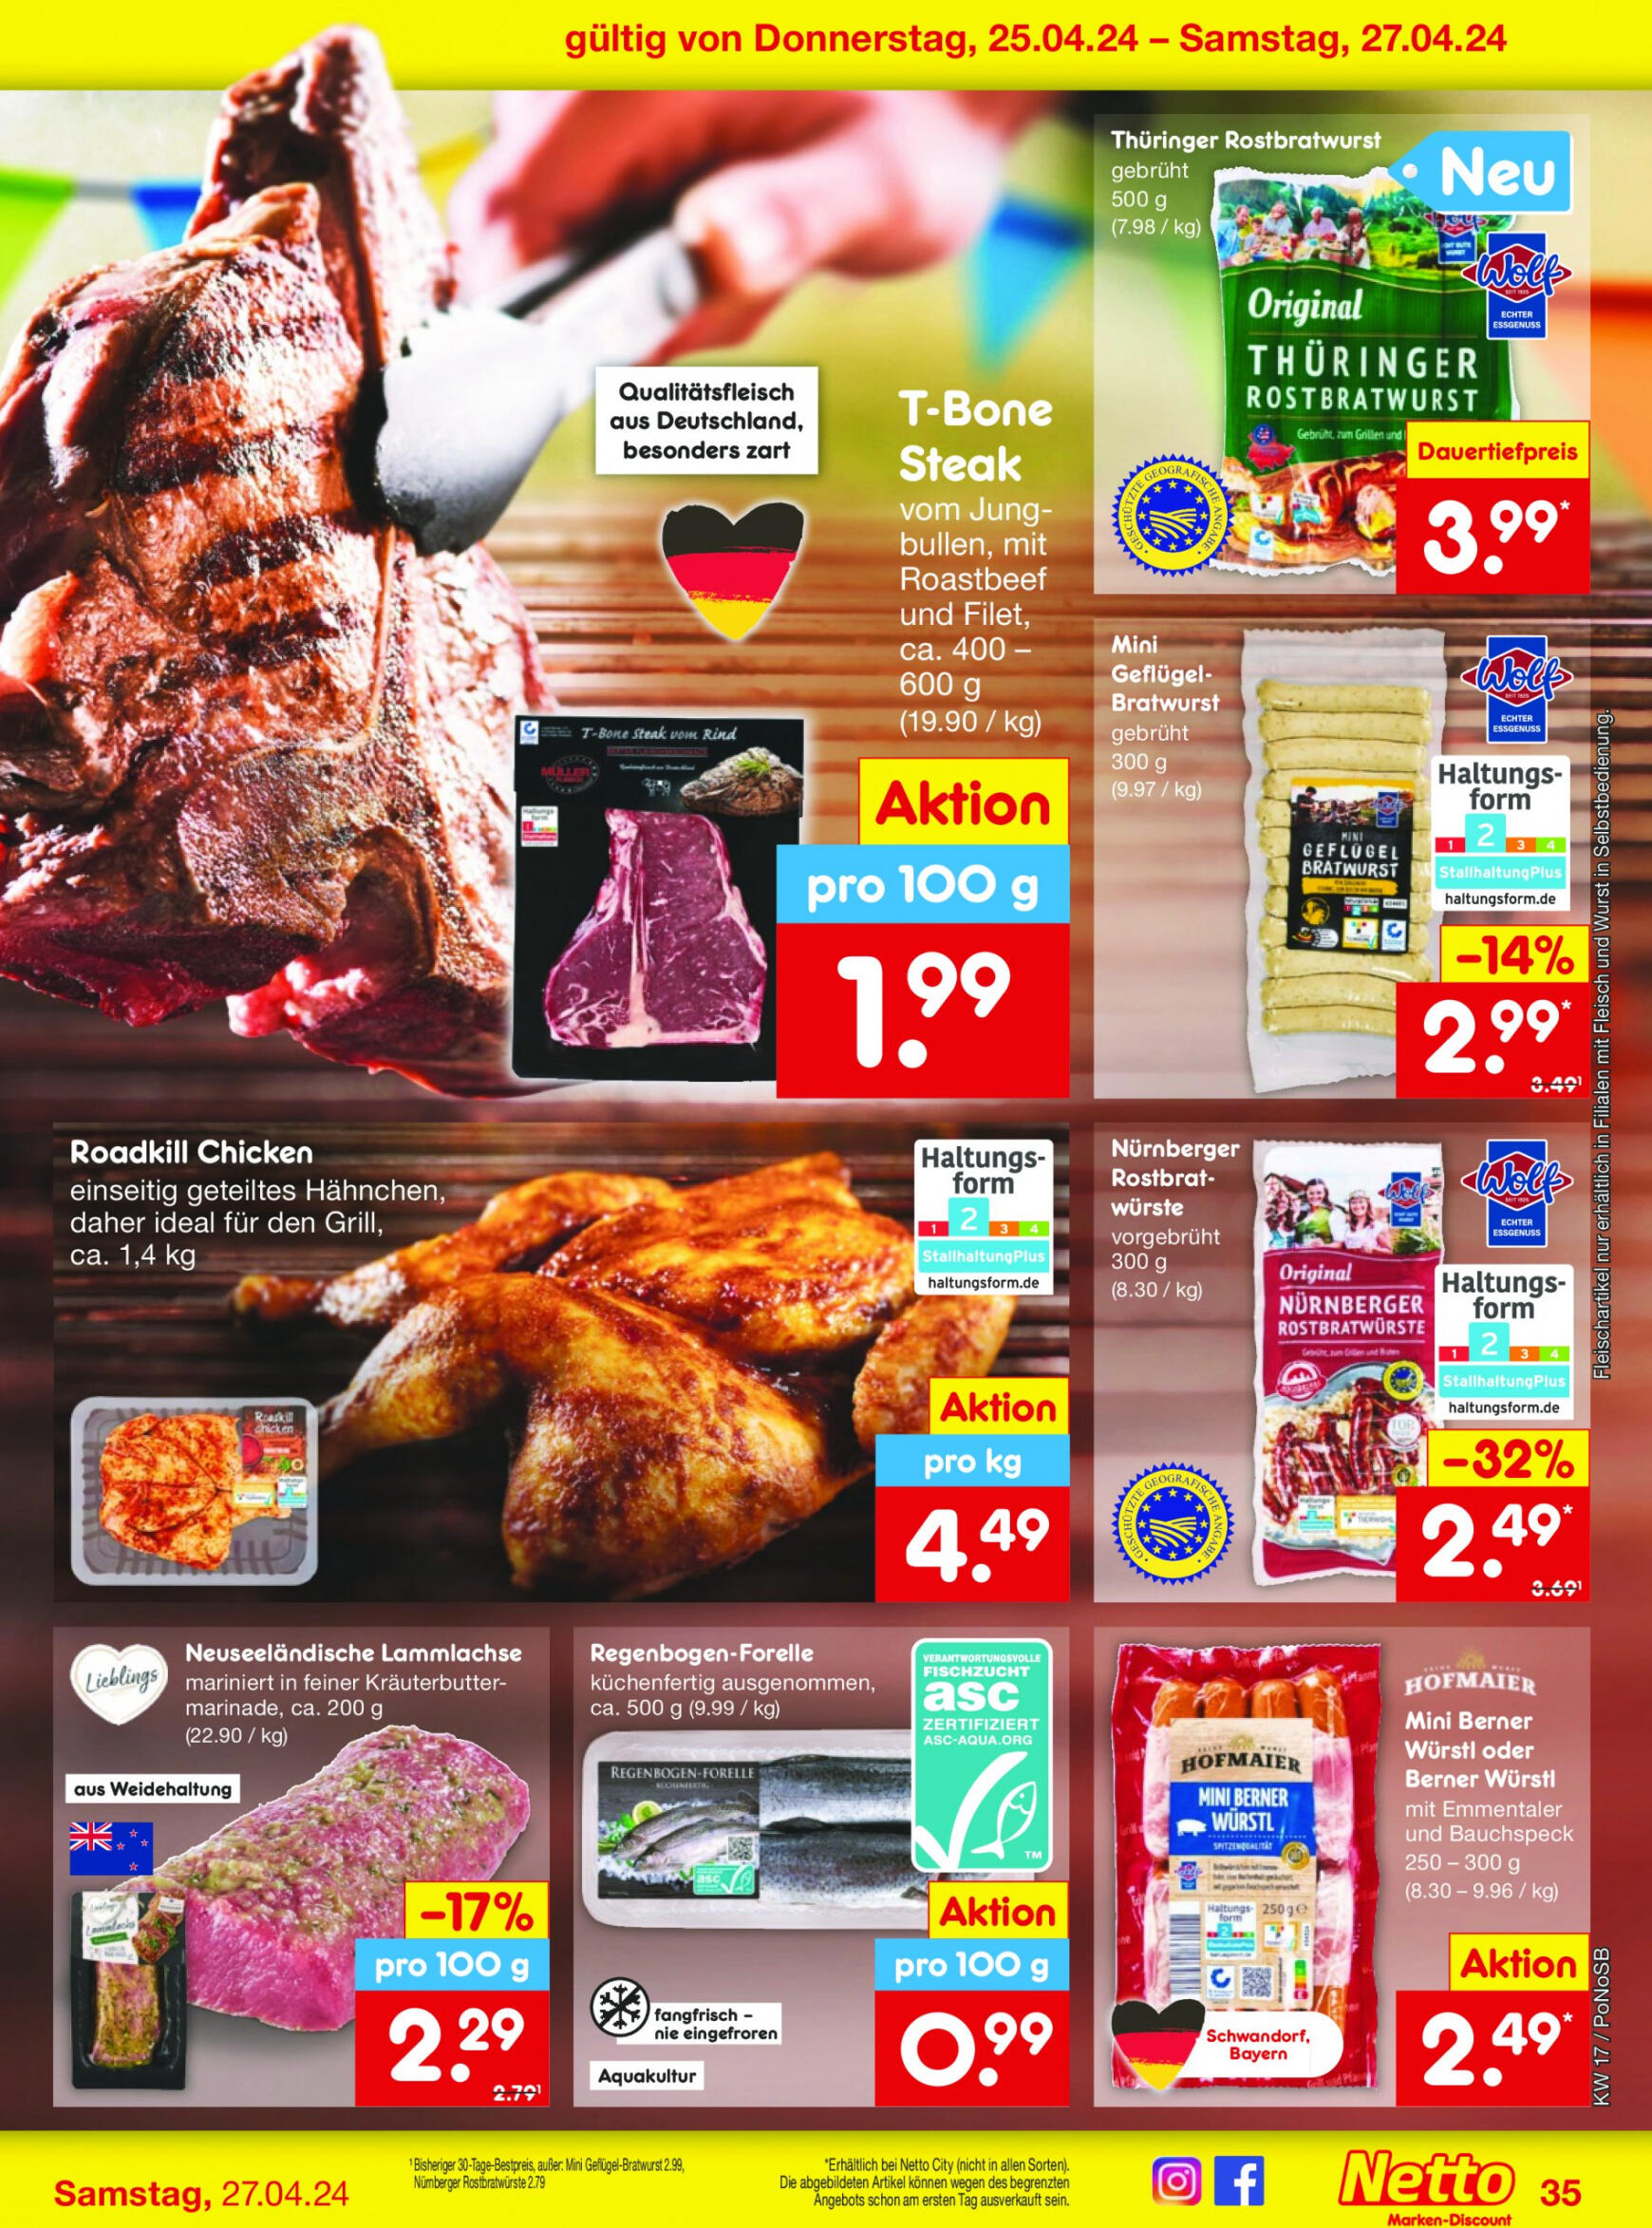 netto - Flyer Netto aktuell 22.04. - 27.04. - page: 41